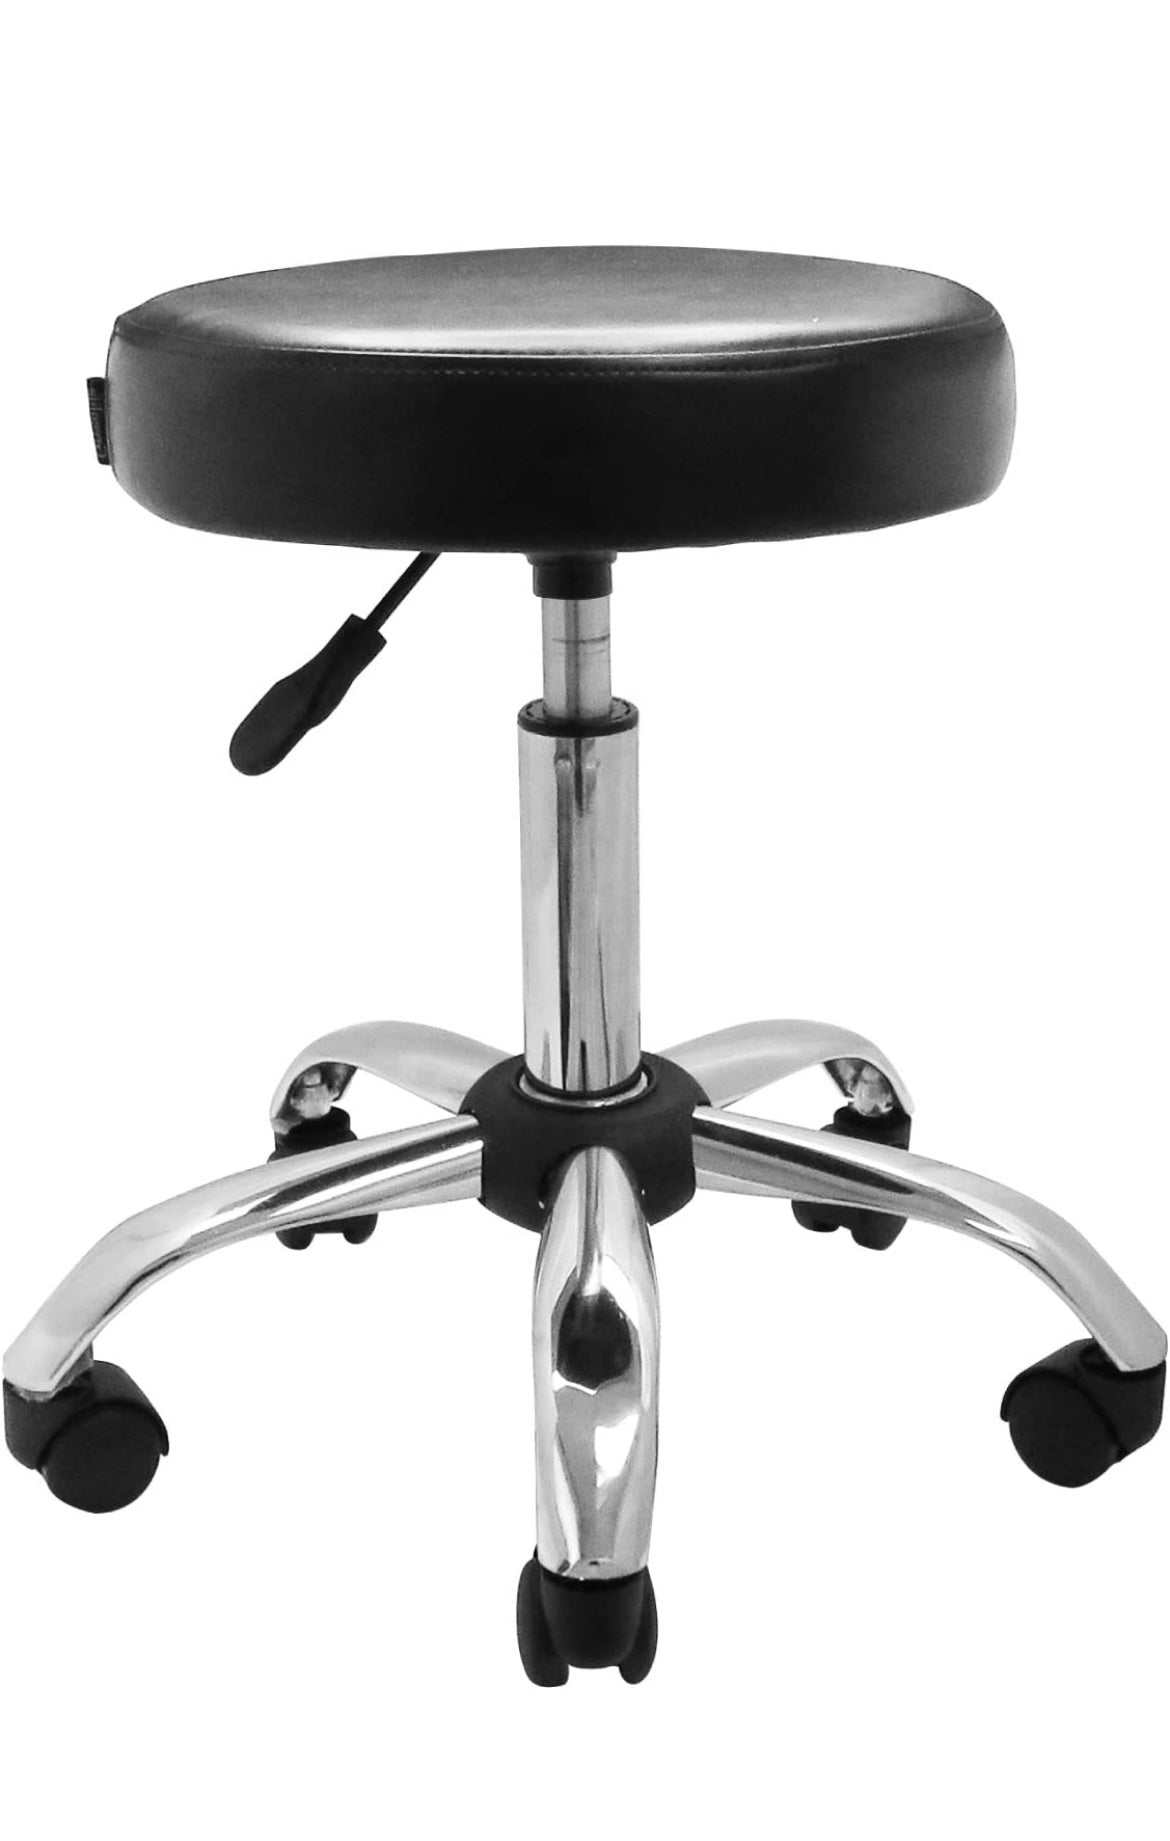 Rolling Swivel stool with Metal frame